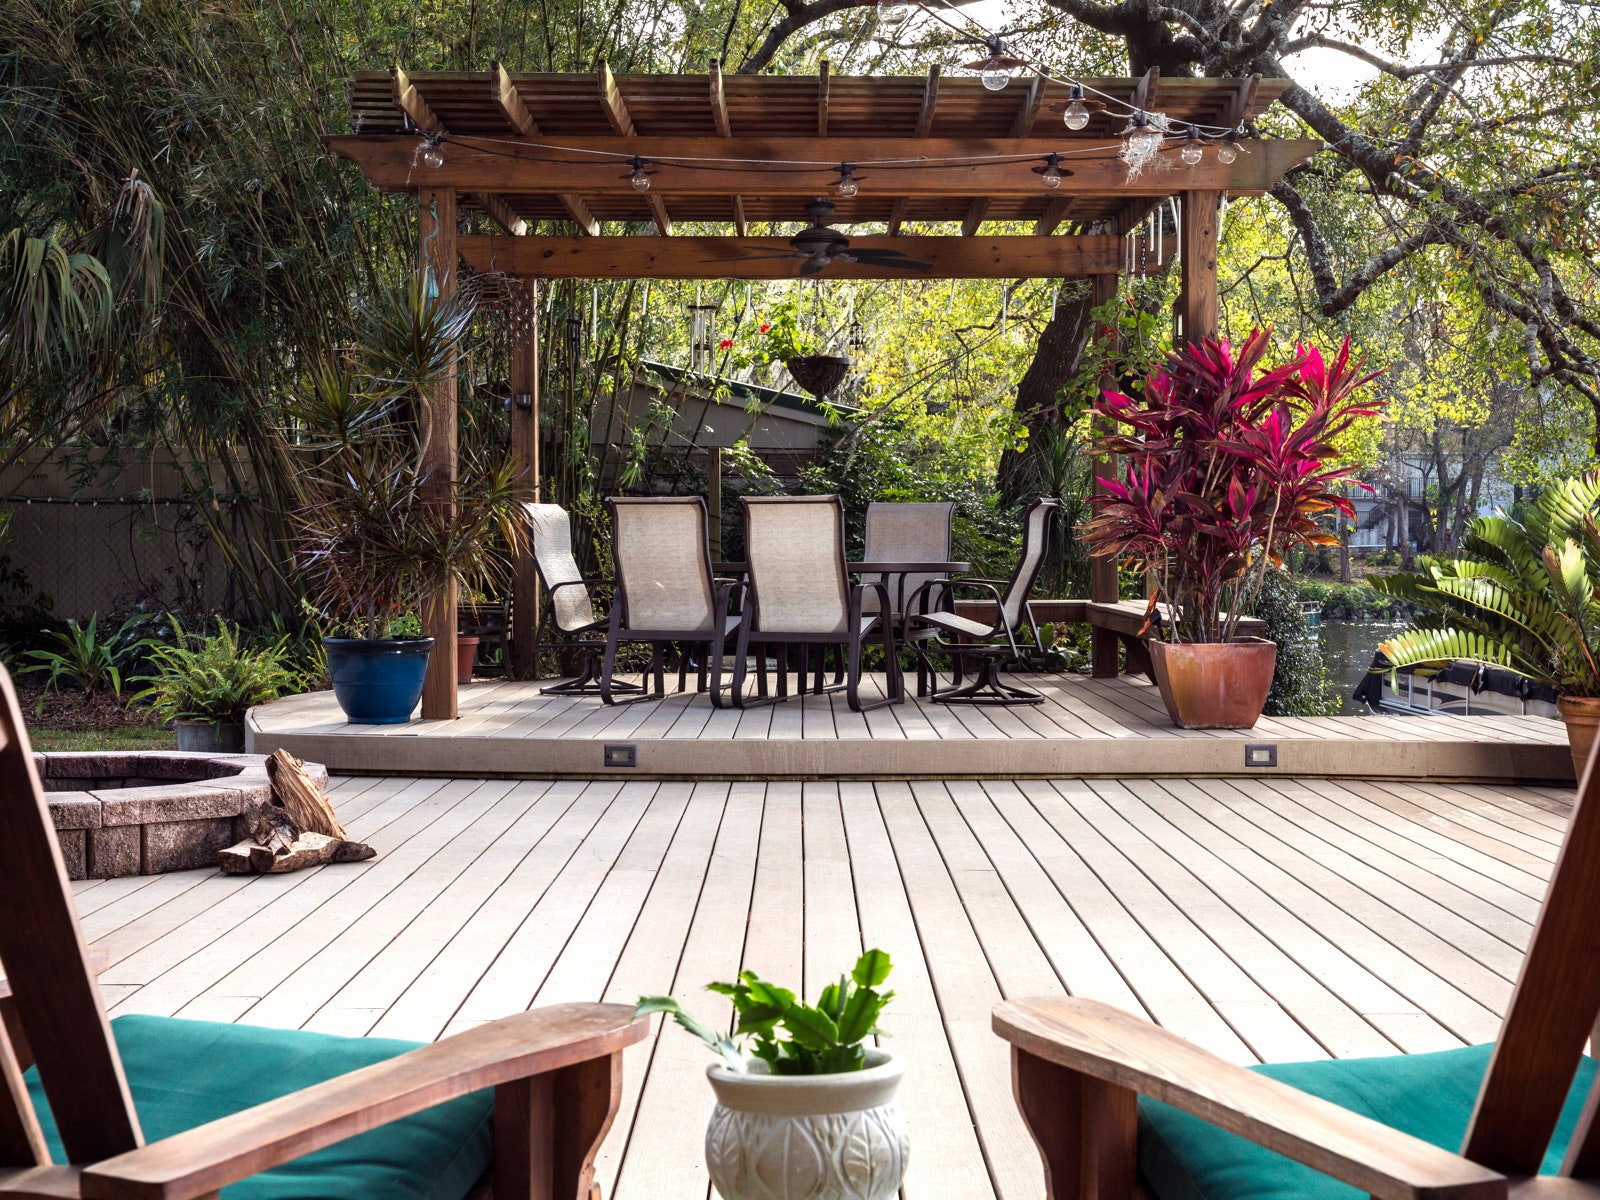 Commercial Decks & Patios - Carolina Home Remodeling Specialists